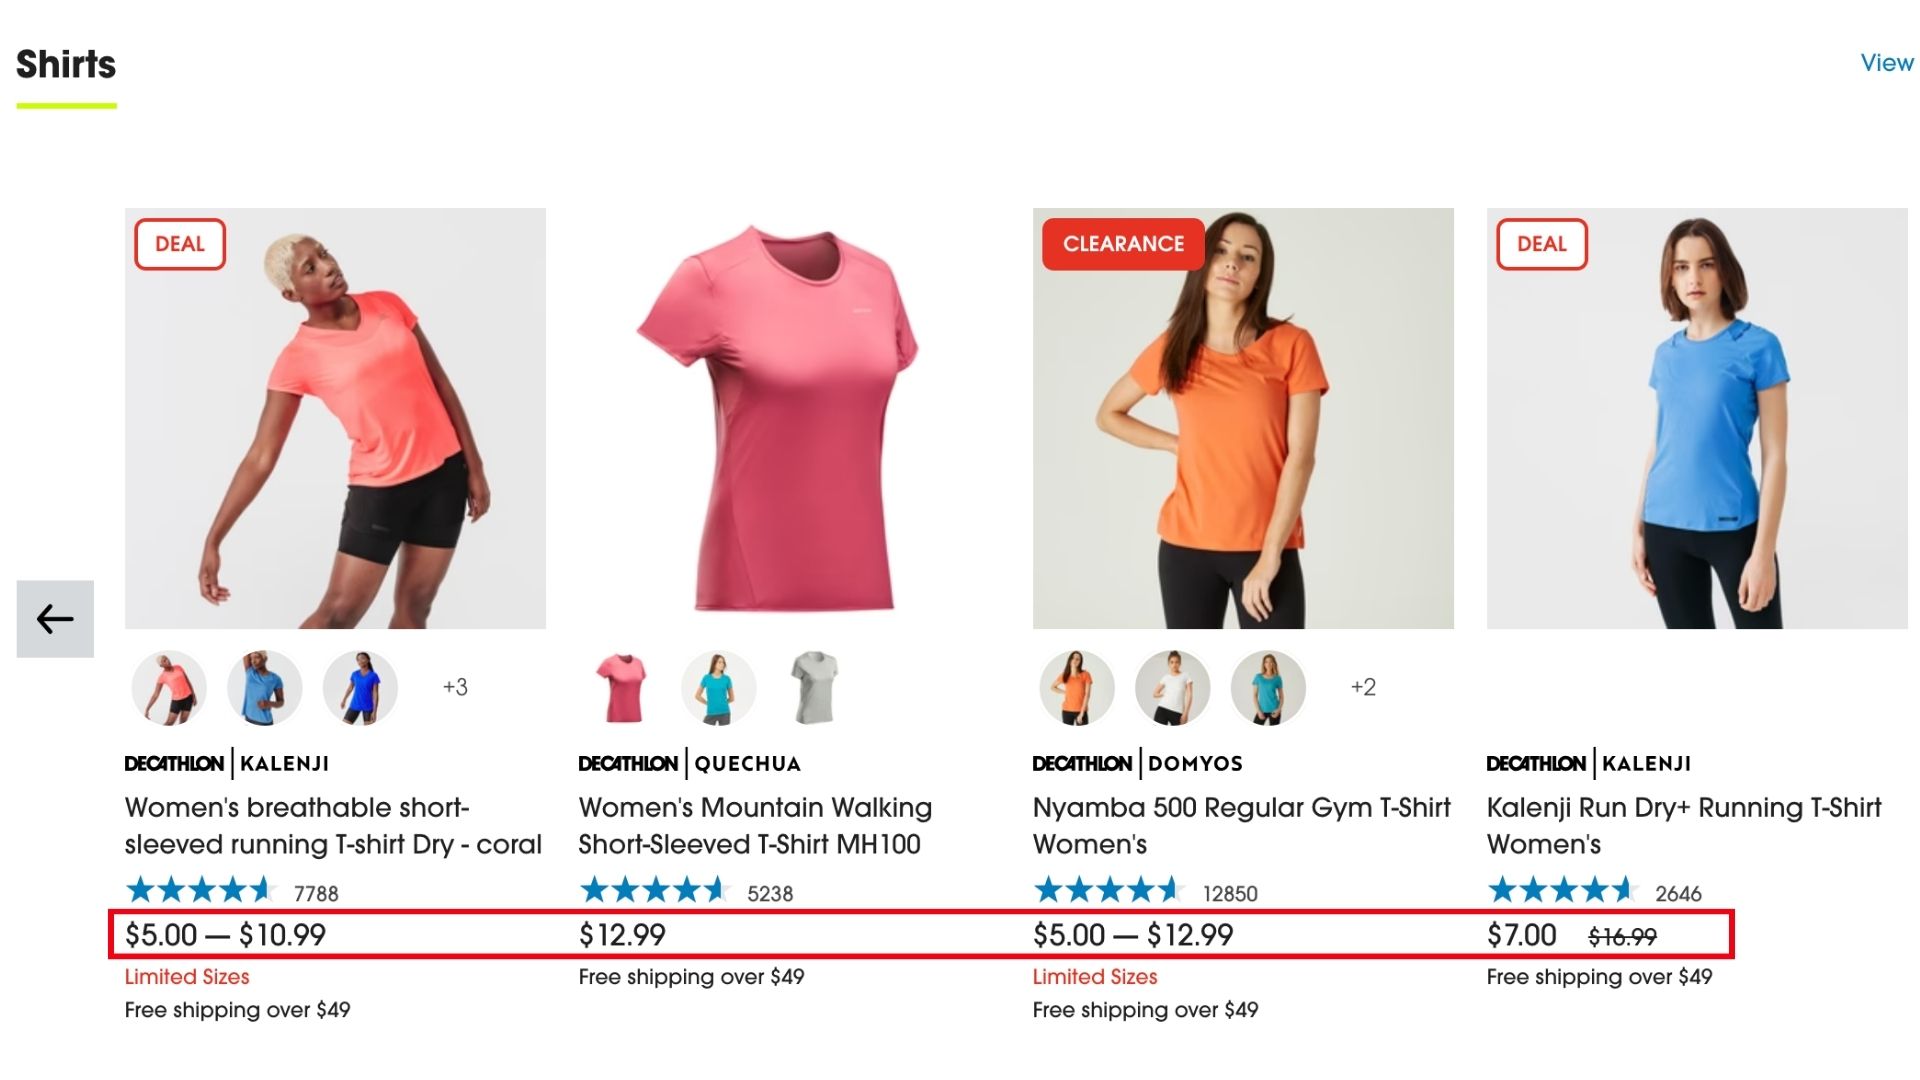 How Decathlon uses psychological pricing